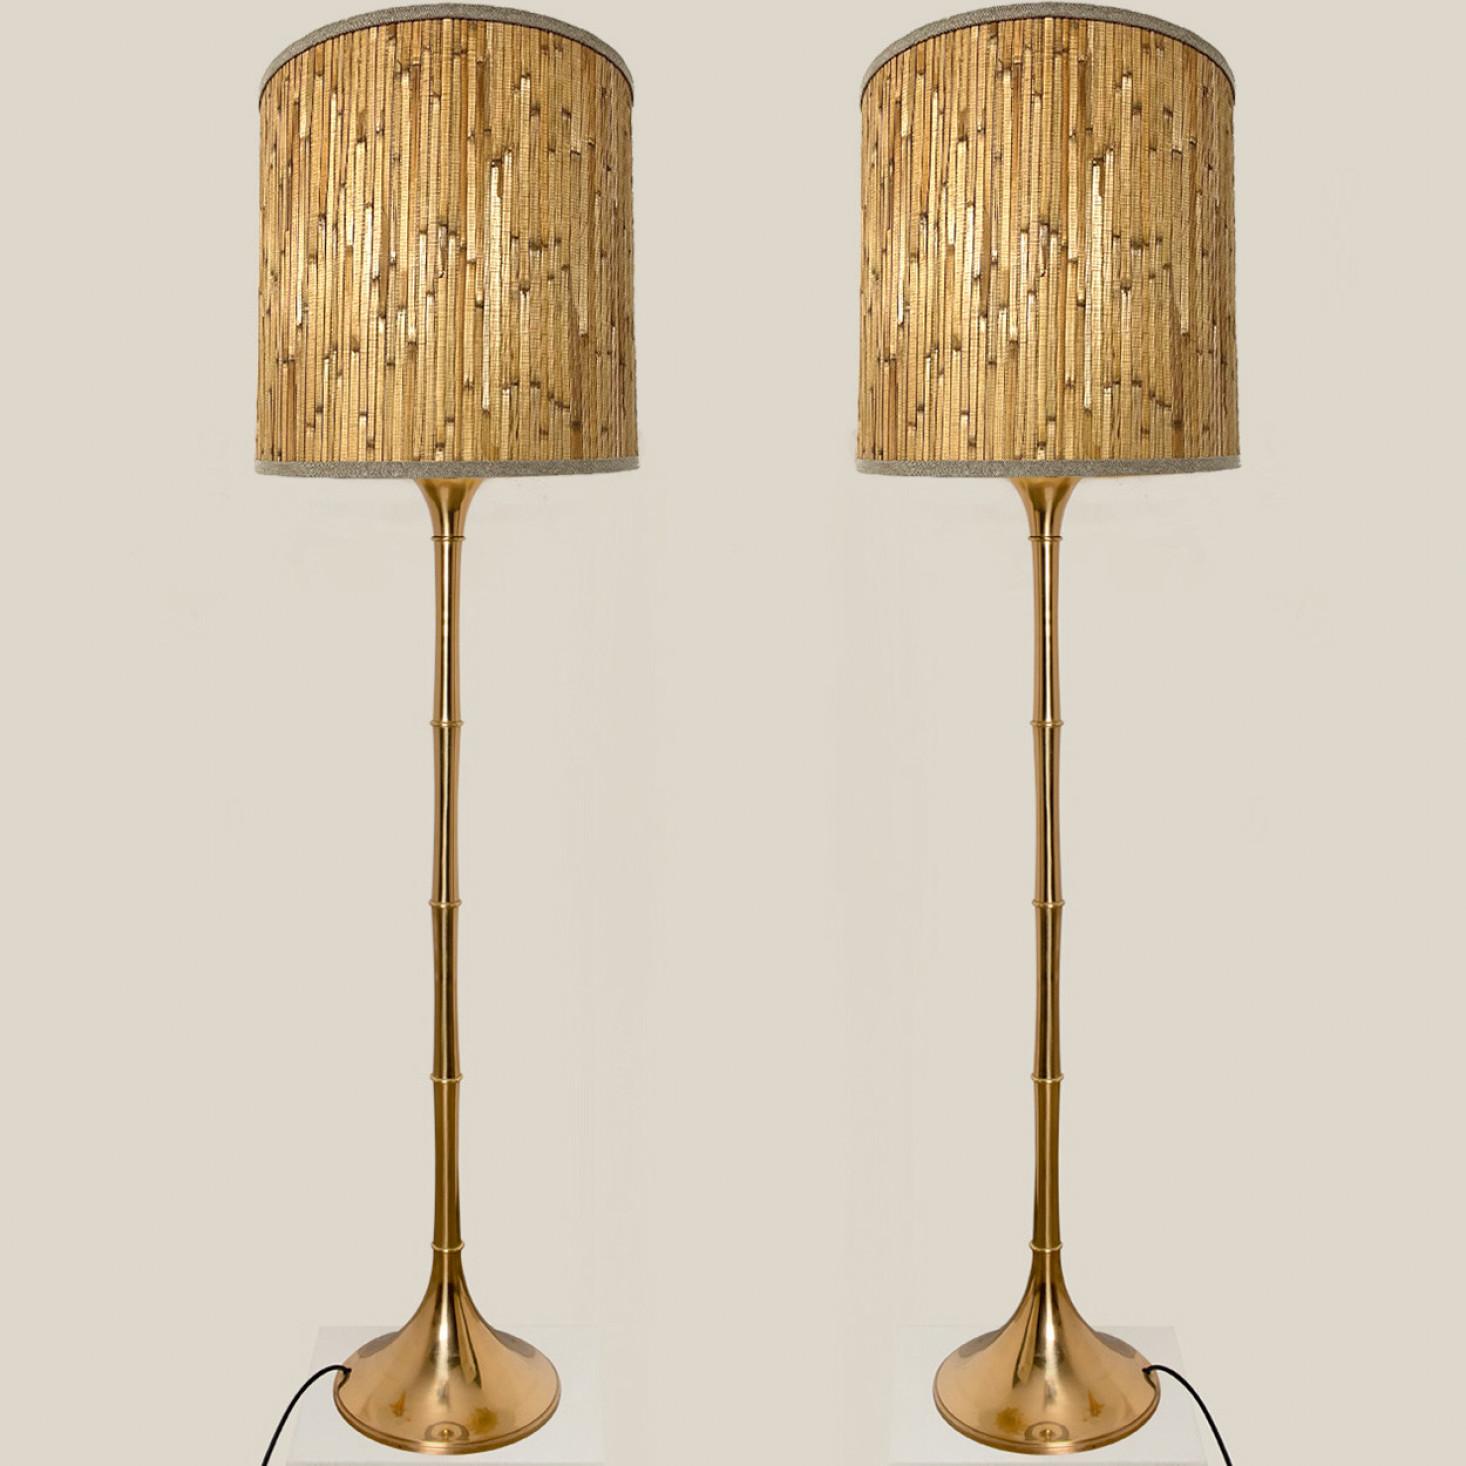 Pair of elegant gold brass wooden floor lamps Model designed by Ingo Maurer, 1968 for Design M Munich, Germany.
With new wood custom made lamp shades with Bronze inner shade. Made by Rene Houben. Also other lampshades available. Ask for additional